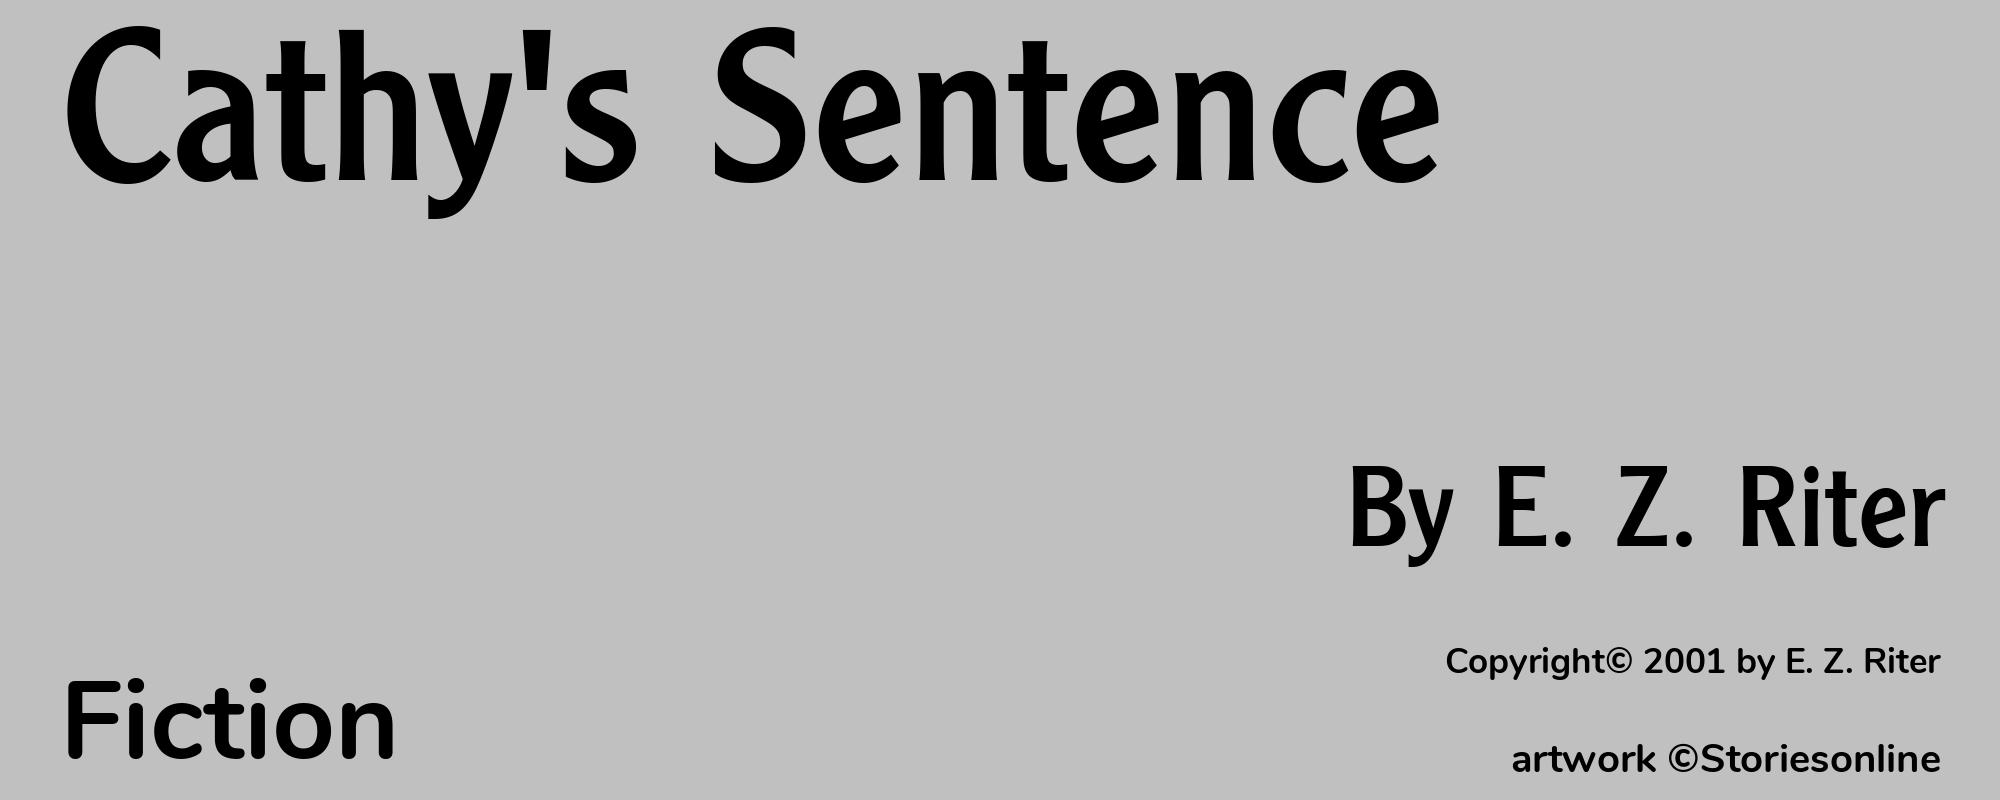 Cathy's Sentence - Cover